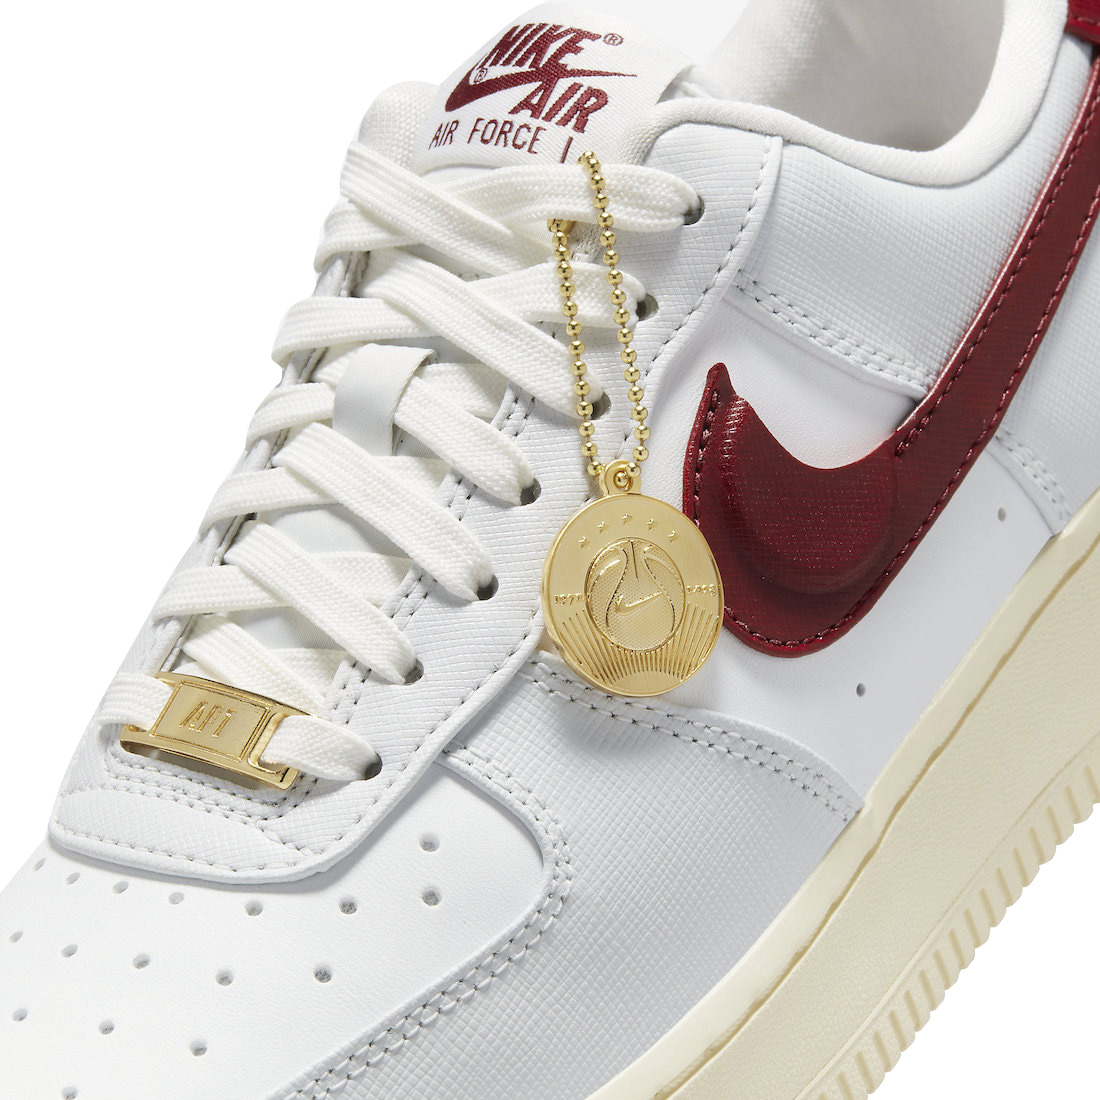 Nike WMNS Air Force 1 Low Photon Dust Team Red DV7584-001